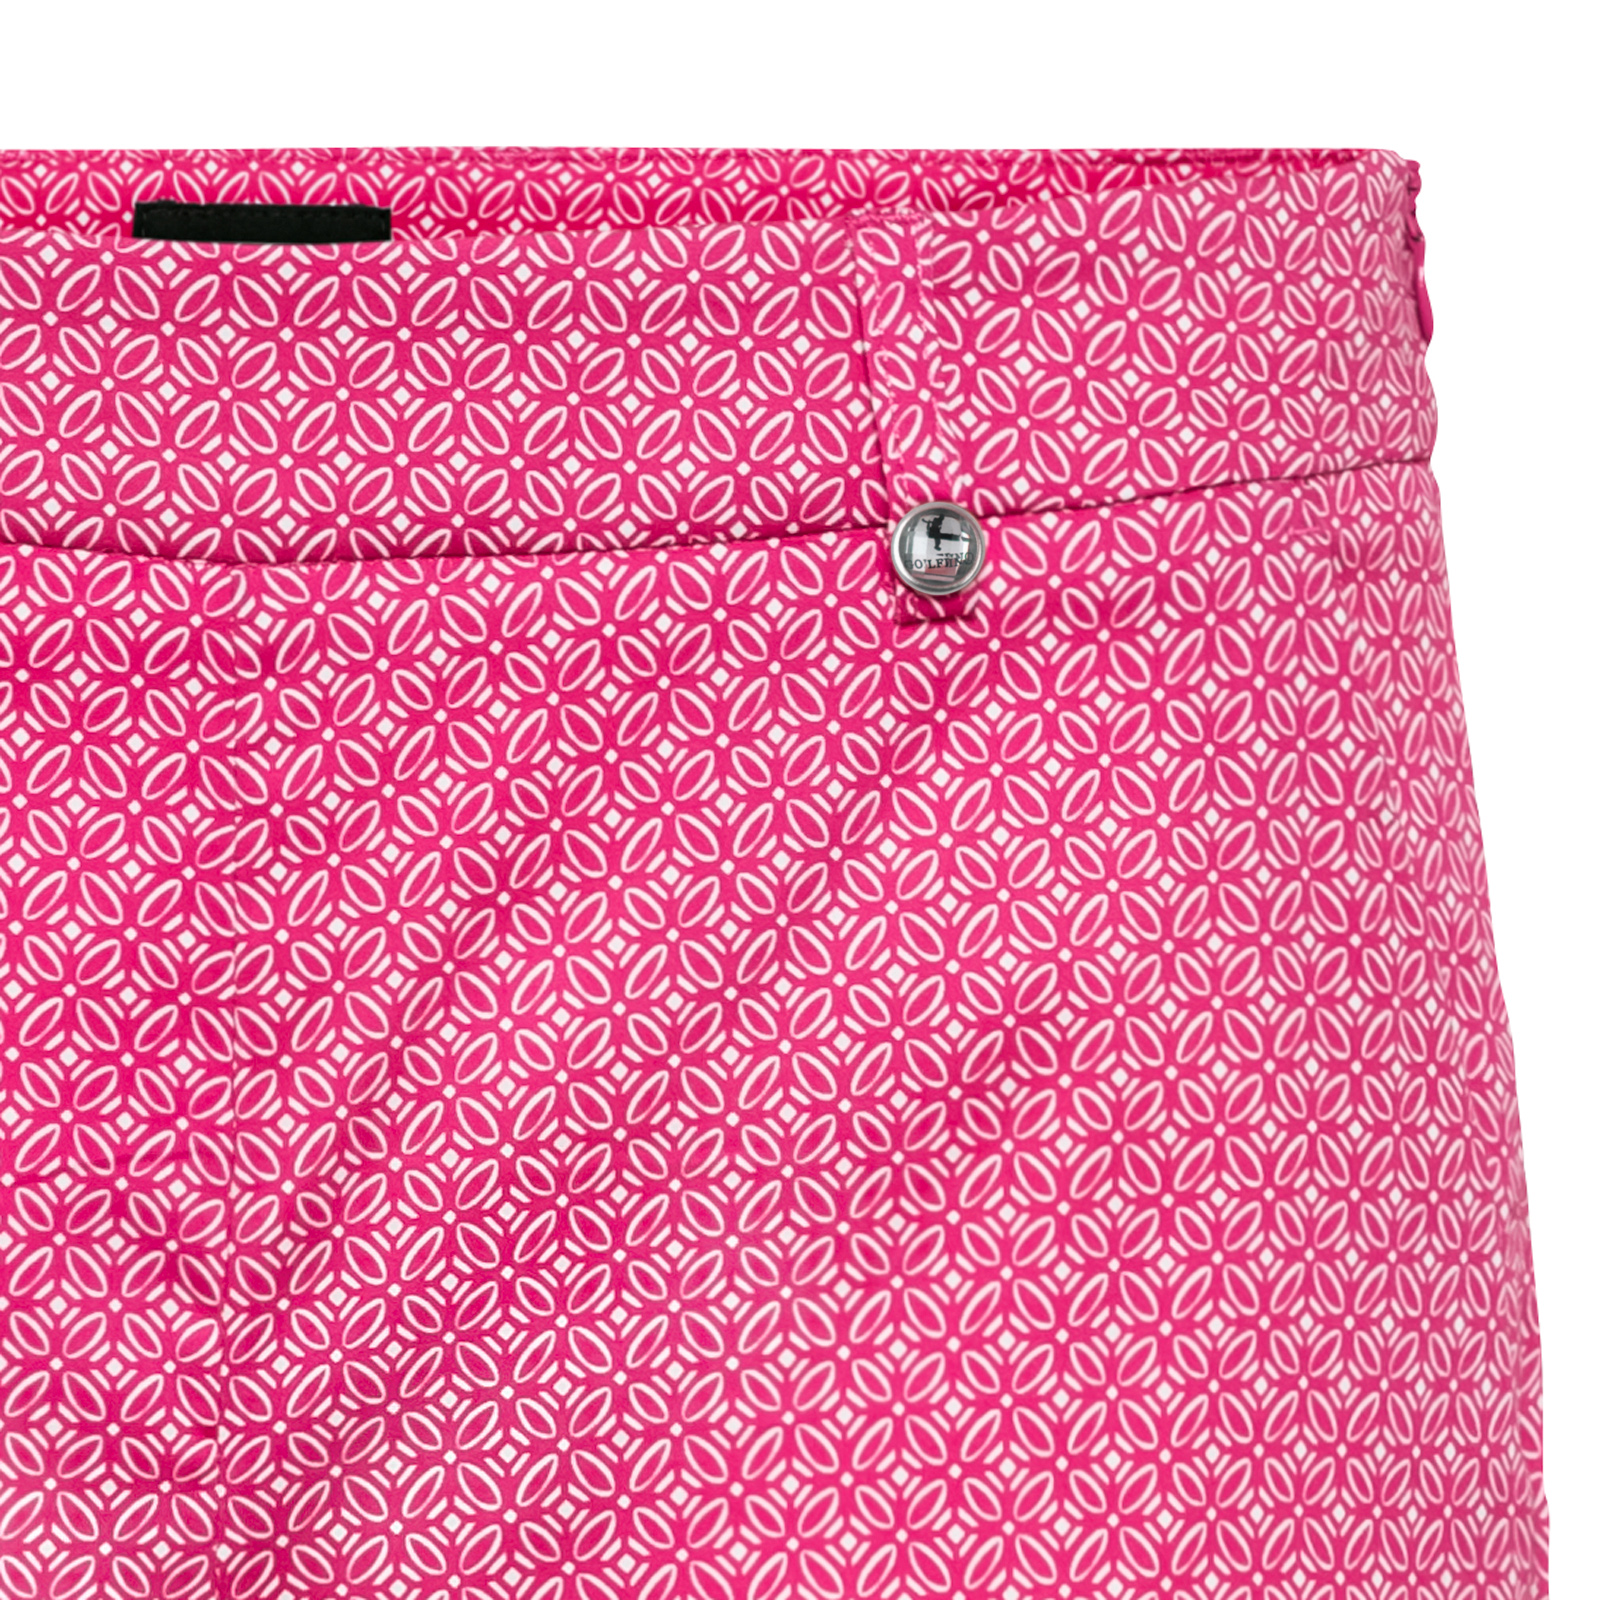 Ladies' golf shorts with stretch function